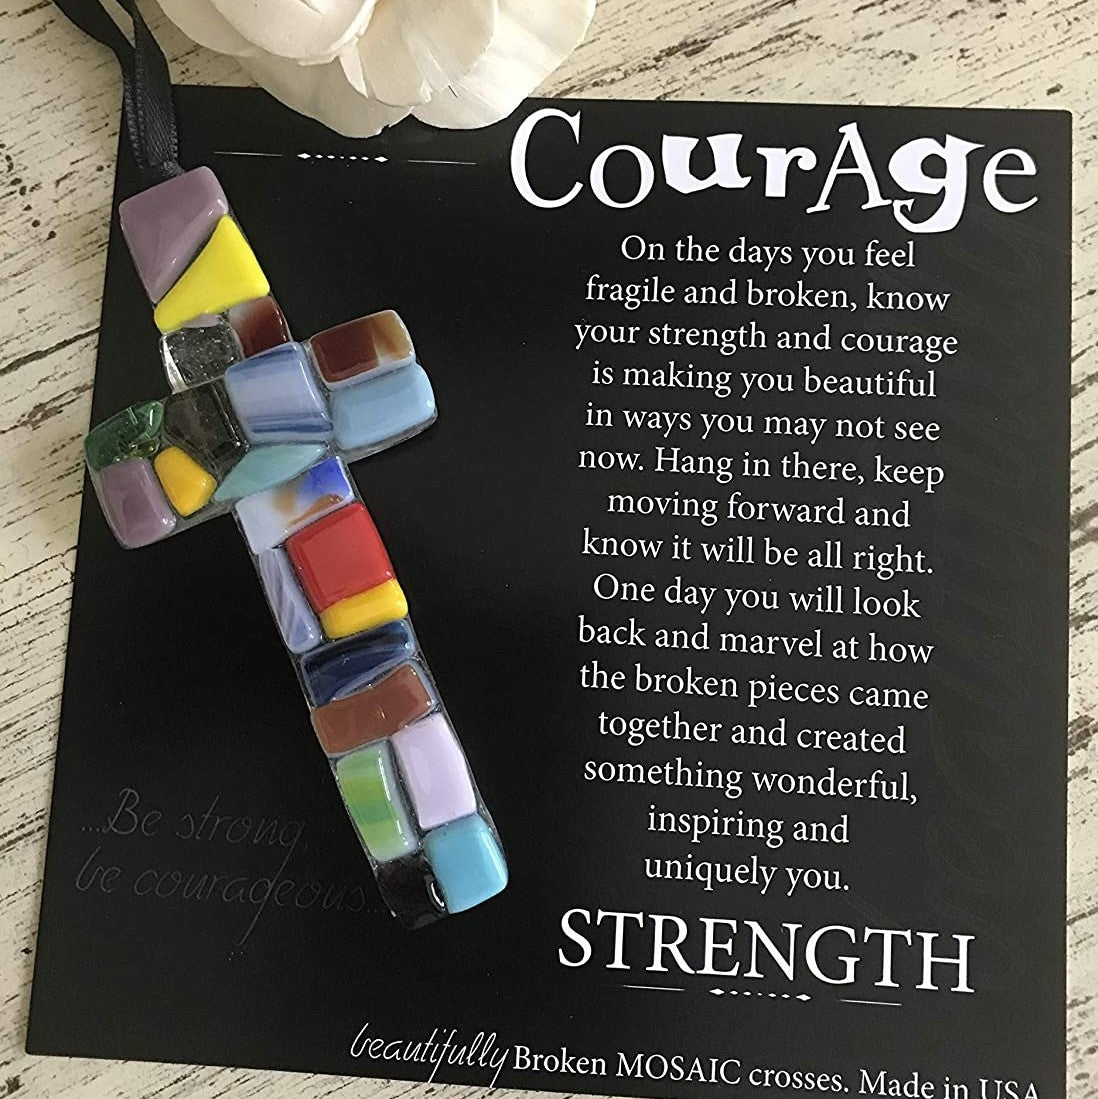 Glass mosaic cross with Courage artwork.